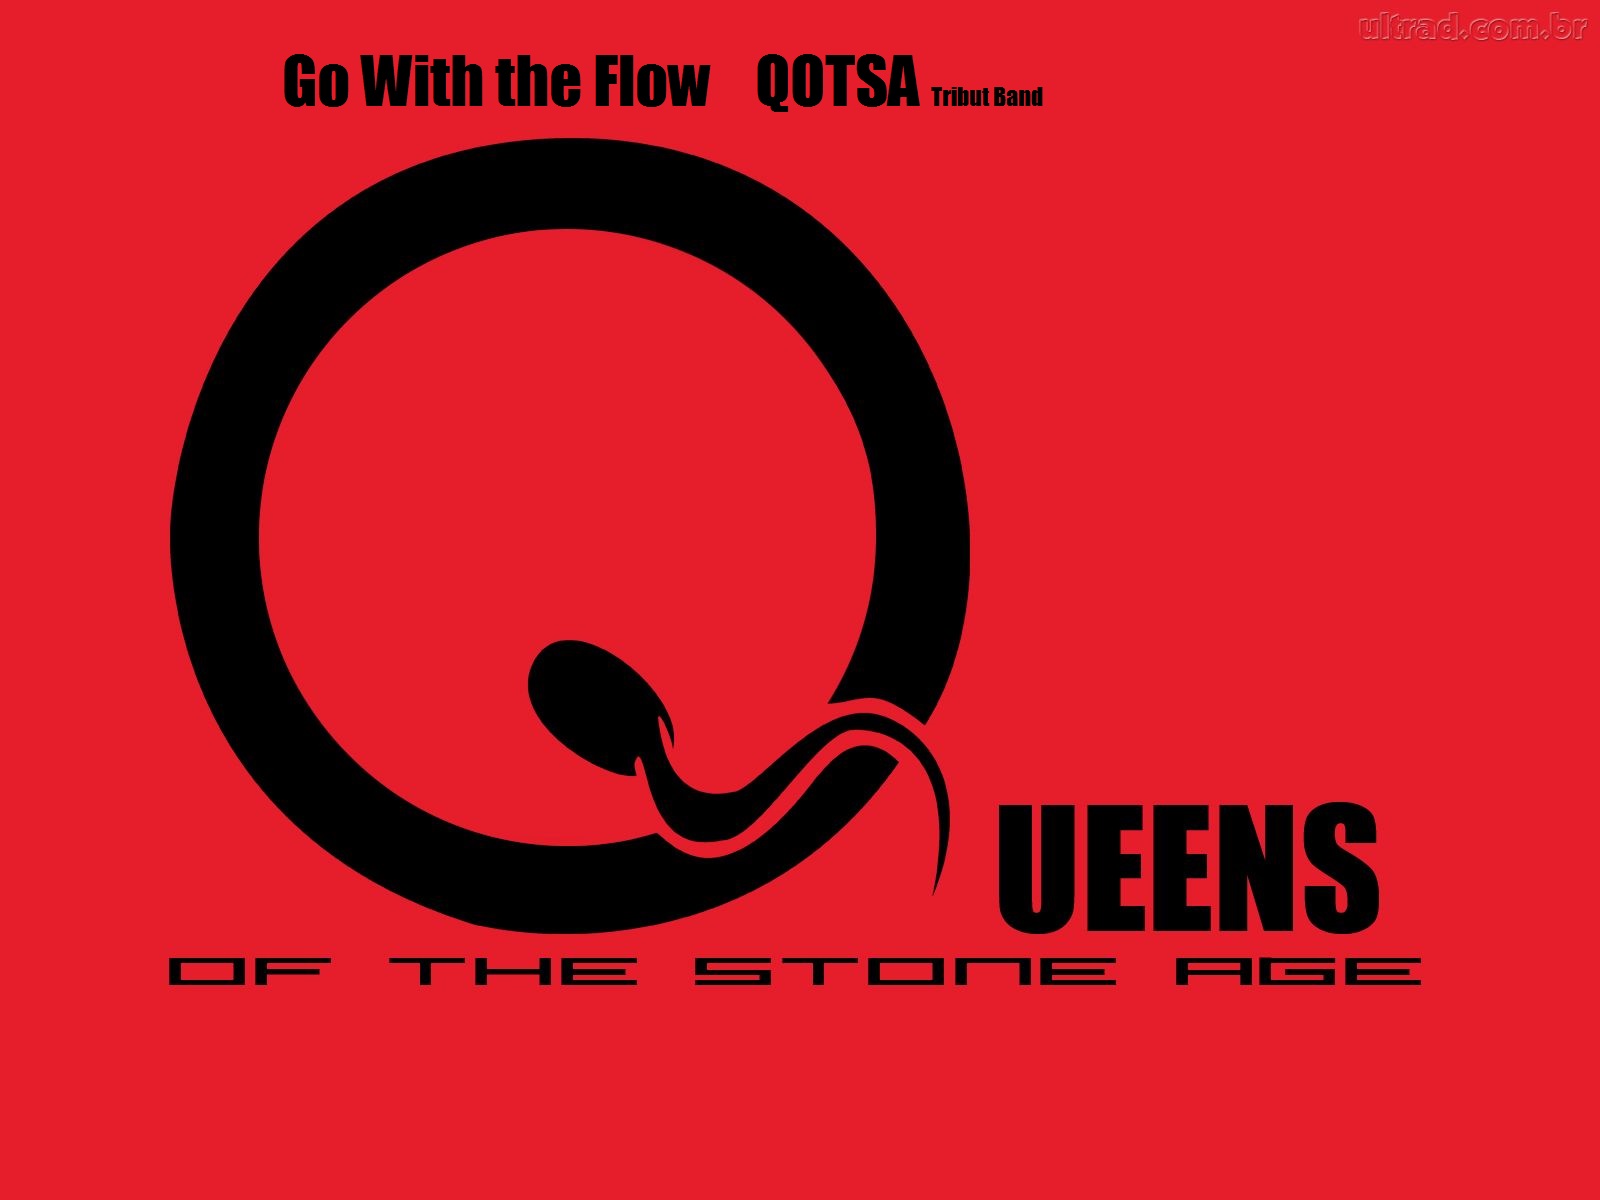 Theflow. Queens of the Stone age логотип. Queens of the Stone age Songs for the Deaf. Queens of the Stone age go with the Flow. Группа Queen of the Stone age логотип.